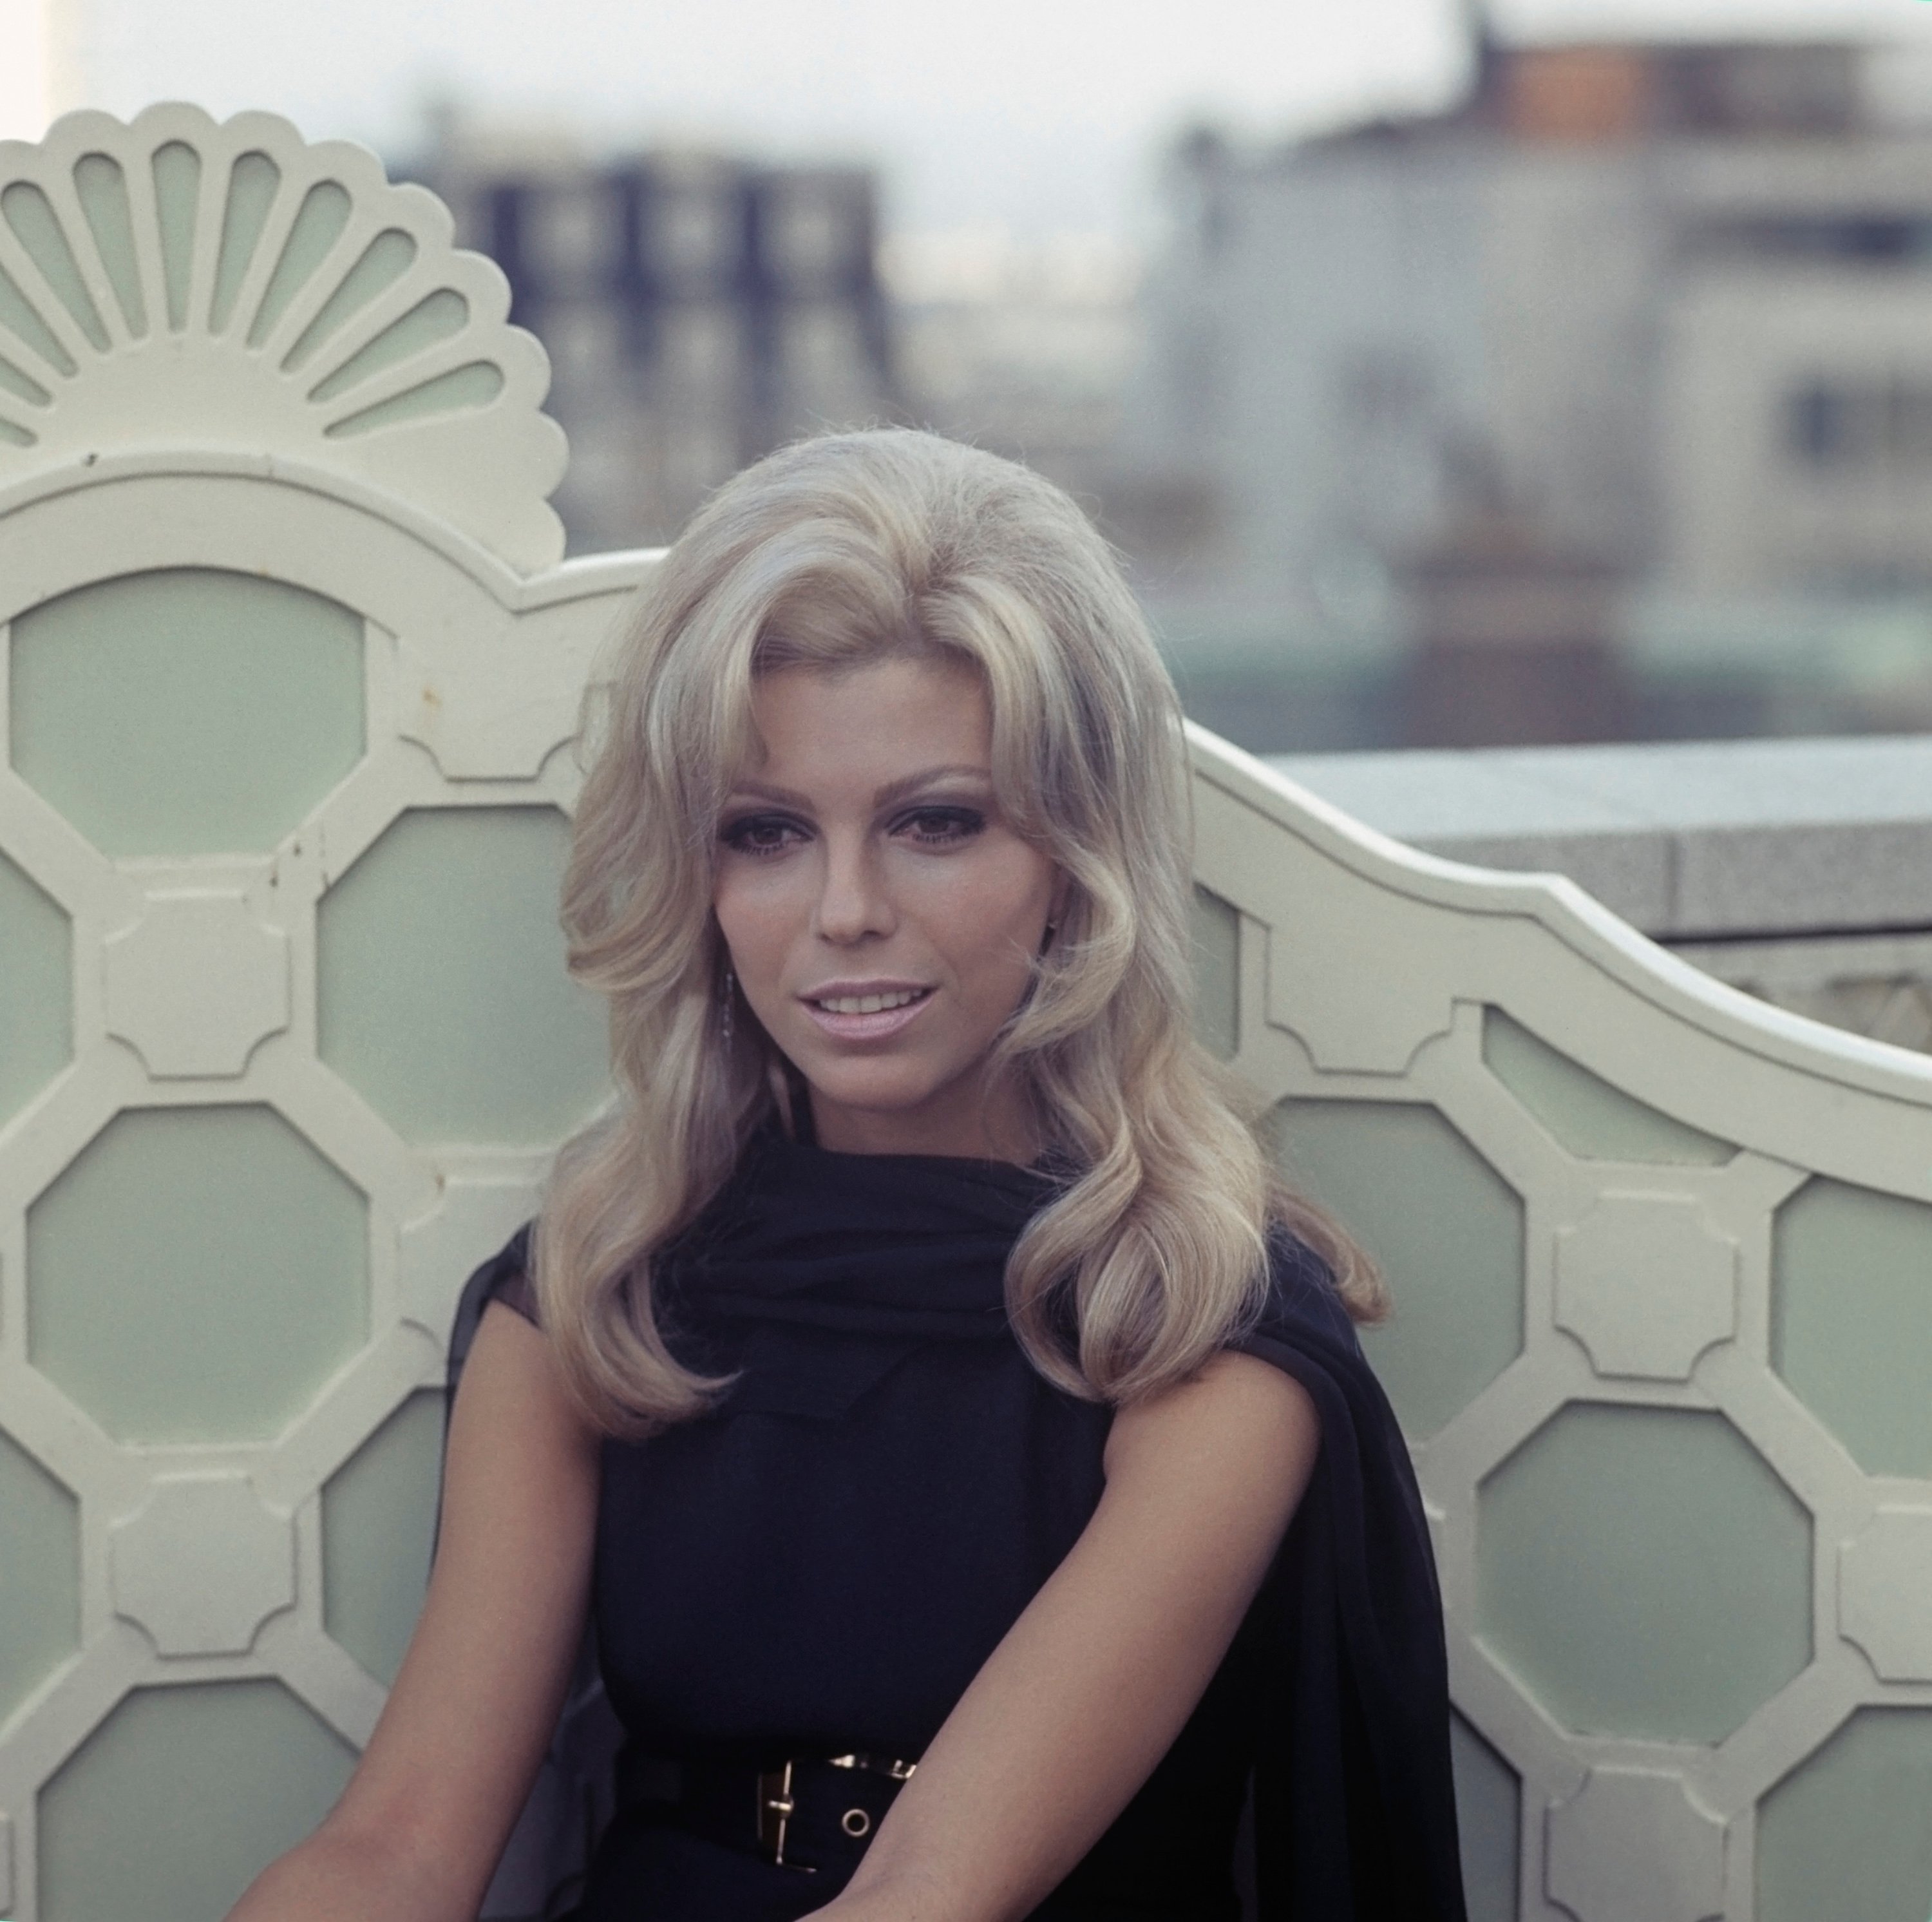 American singer and actress Nancy Sinatra posed at a hotel roof garden in London